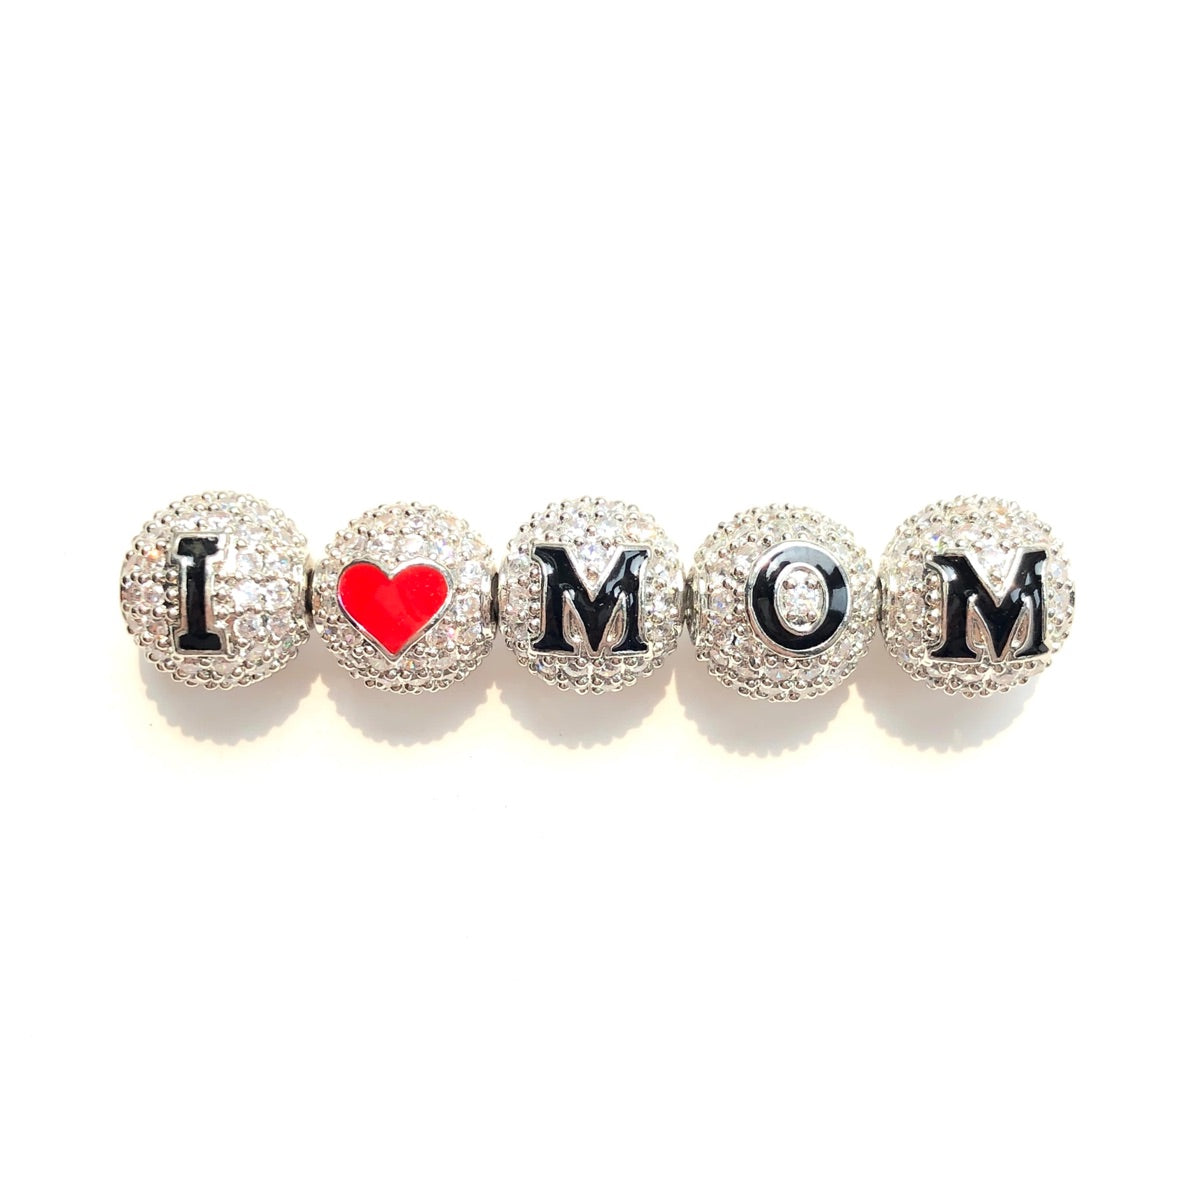 10pcs/lot 10mm CZ Paved I LOVE MOM Letter Ball Spacers Beads for Mother's Day Silver-2 Sets CZ Paved Spacers 10mm Beads Ball Beads Mother's Day Mother's Day Beads New Spacers Arrivals Charms Beads Beyond